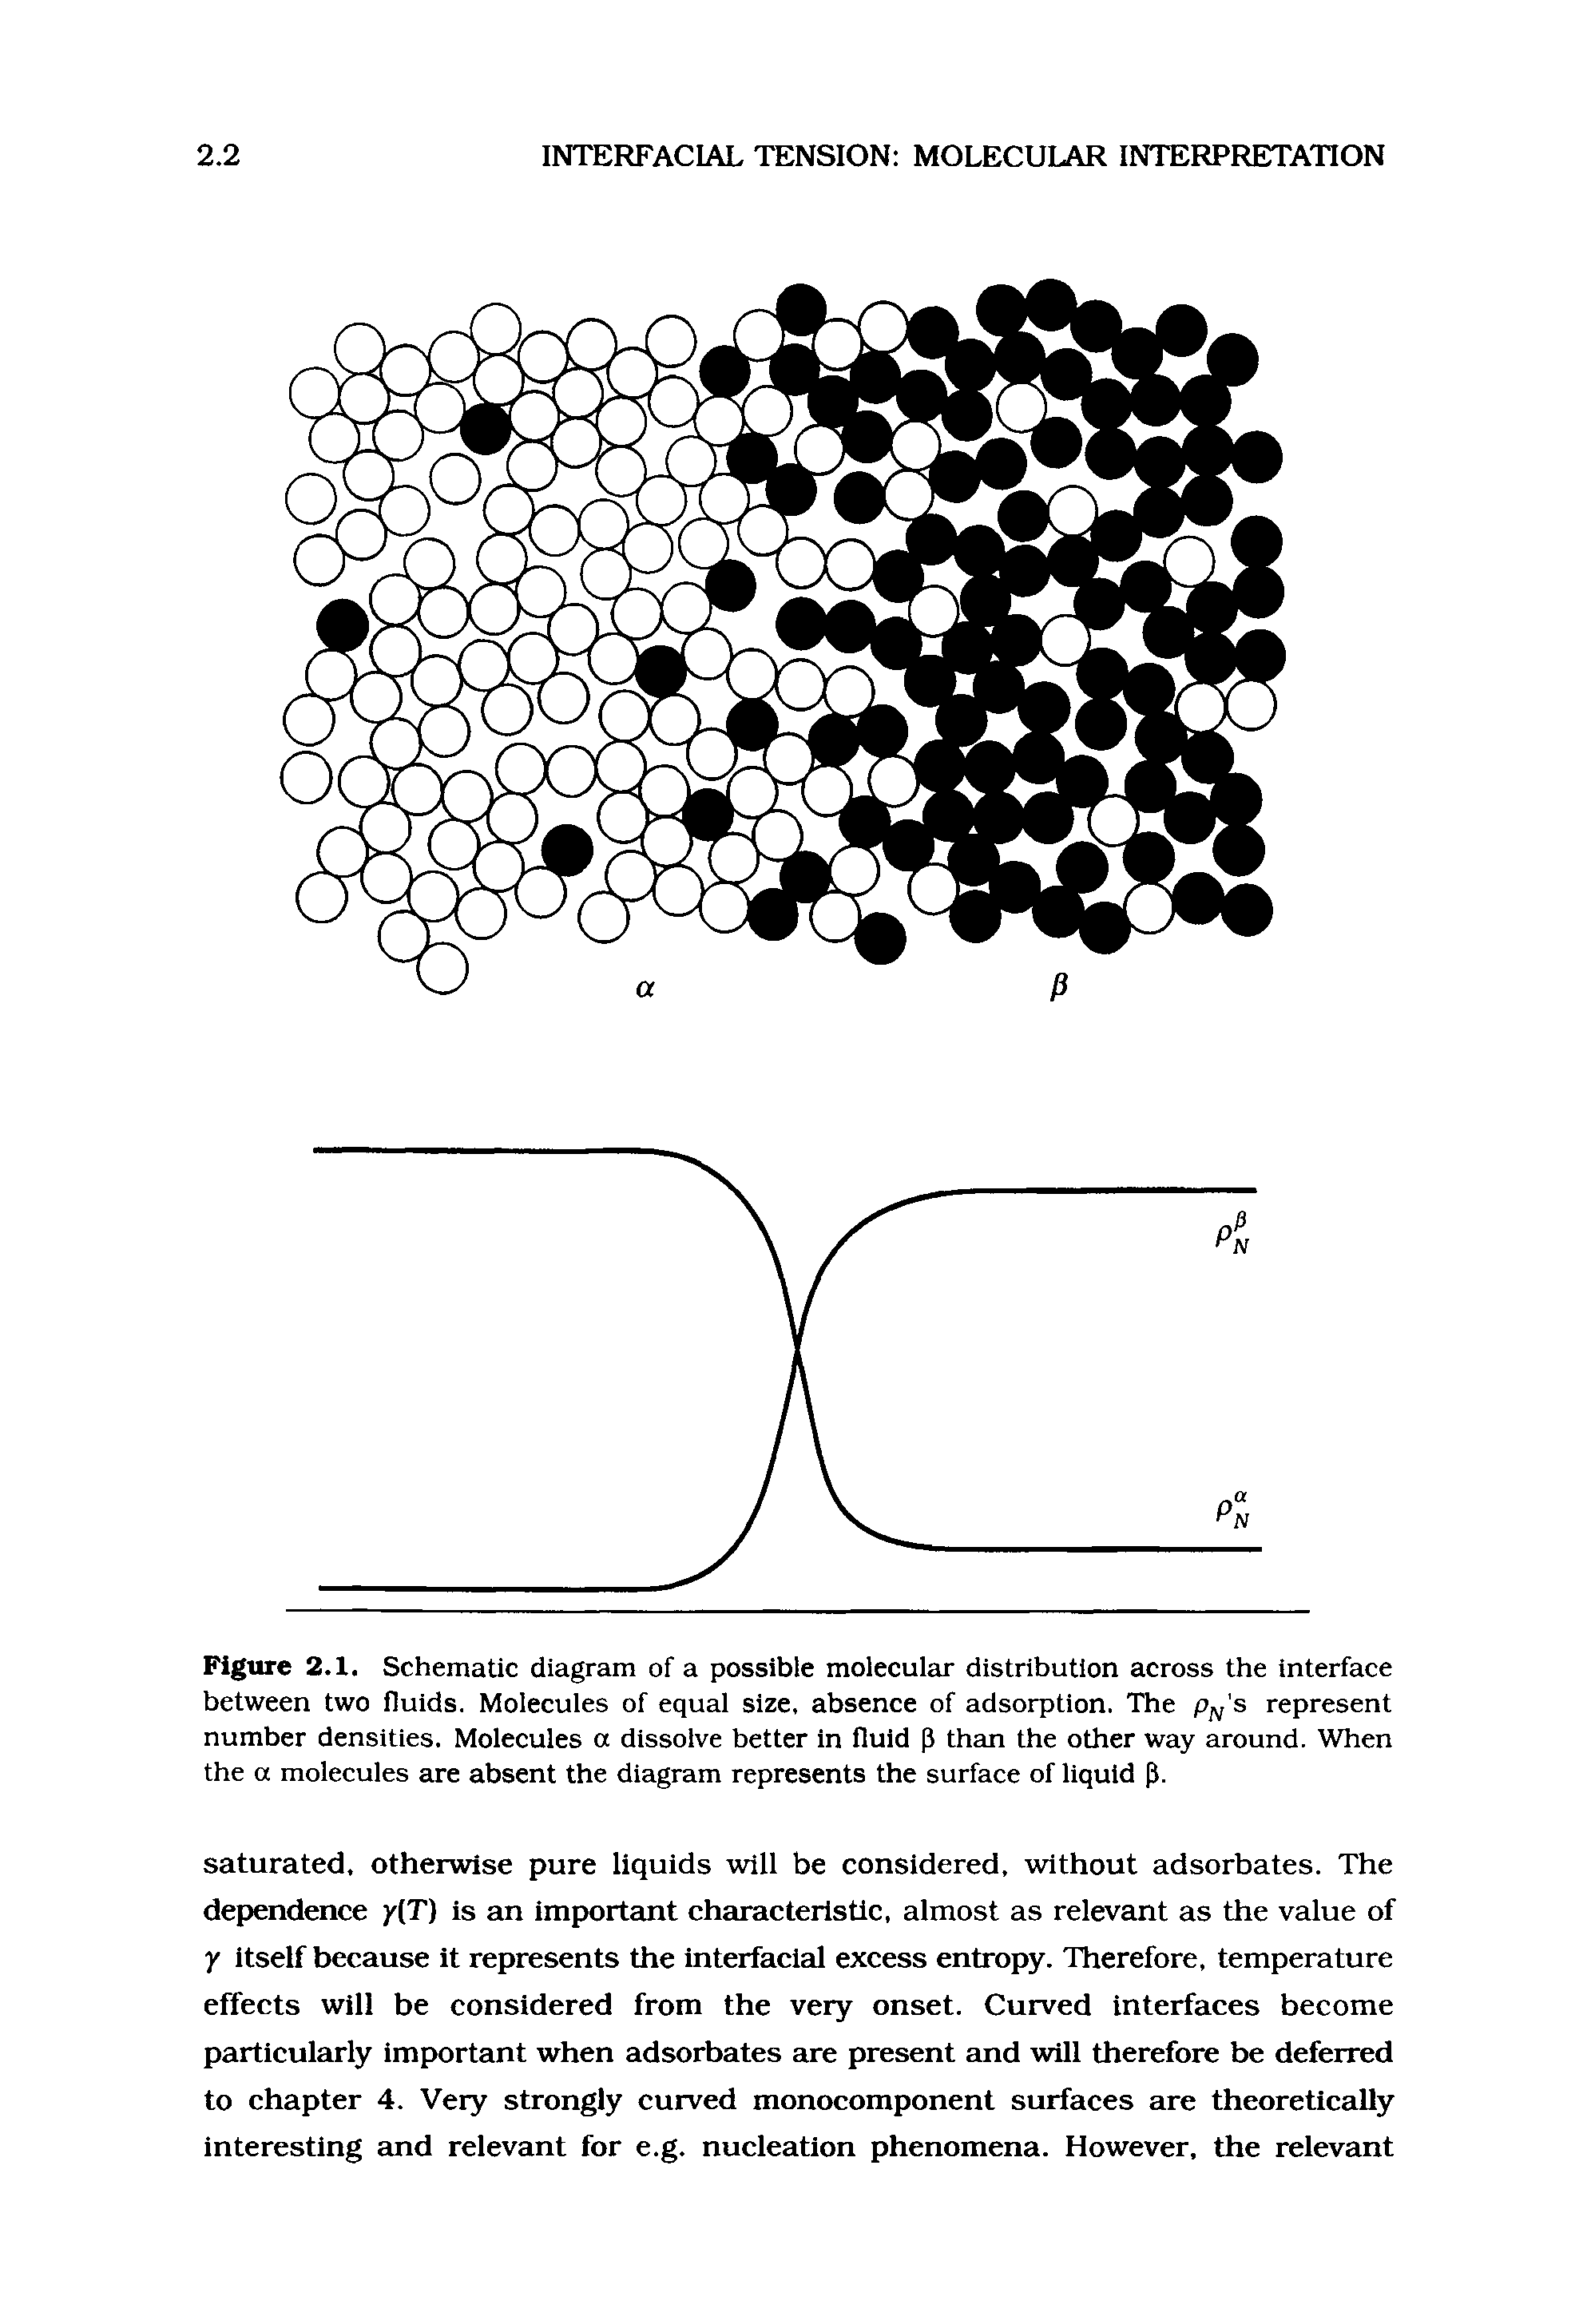 Figure 2.1. Schematic diagram of a possible molecular distribution across the interface between two fluids. Molecules of equal size, absence of adsorption. The Pf s represent number densities. Molecules a dissolve better in fluid p than the other way around. When the a molecules are absent the diagram represents the surface of liquid p.